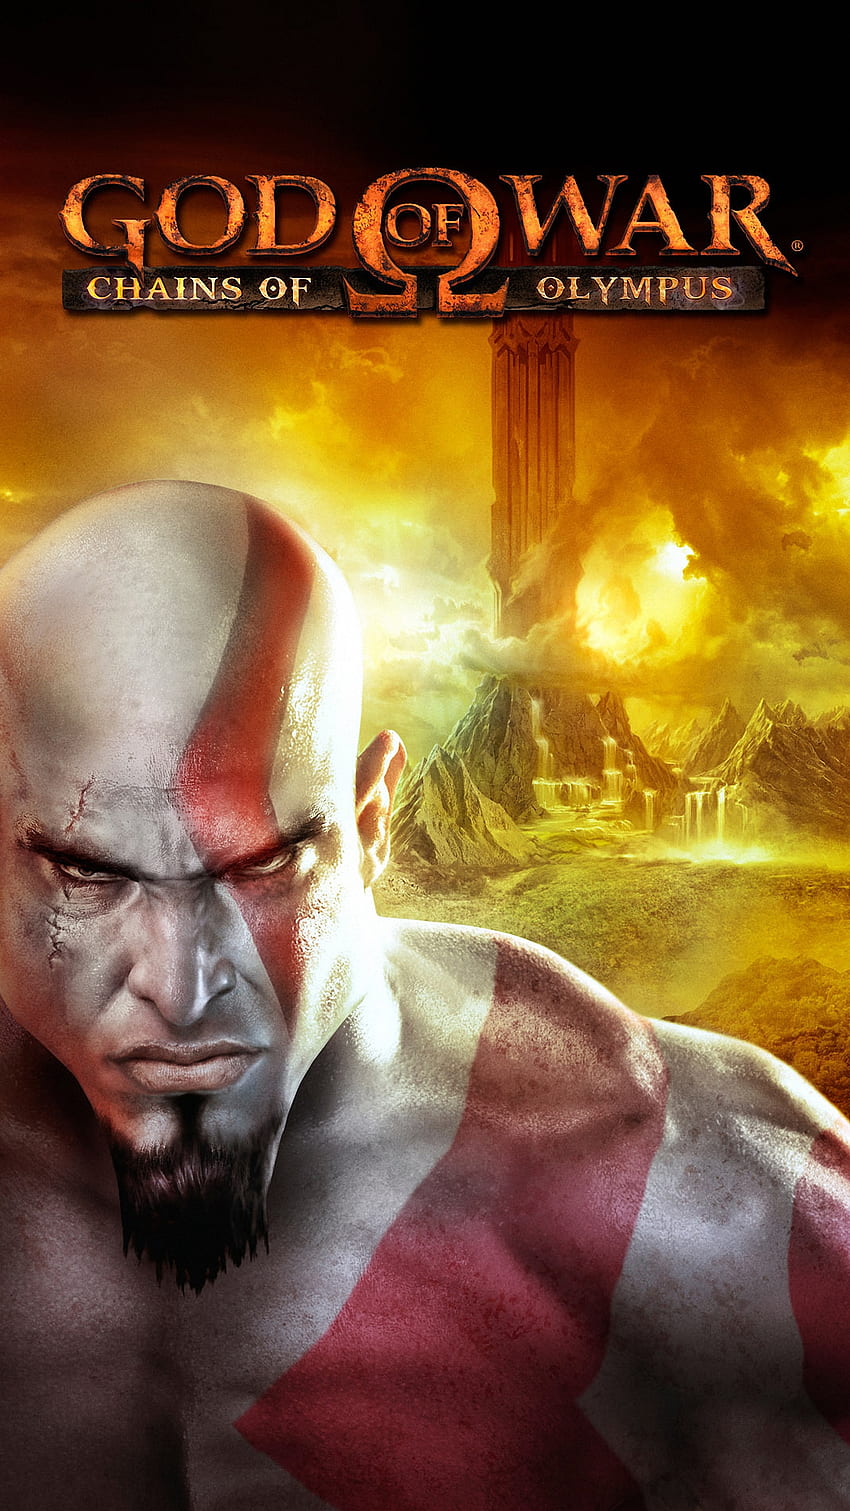 God Of War Chains Of Olympus for iPhone 11, Pro Max, X, 8, 7, 6 - on 3 HD phone wallpaper